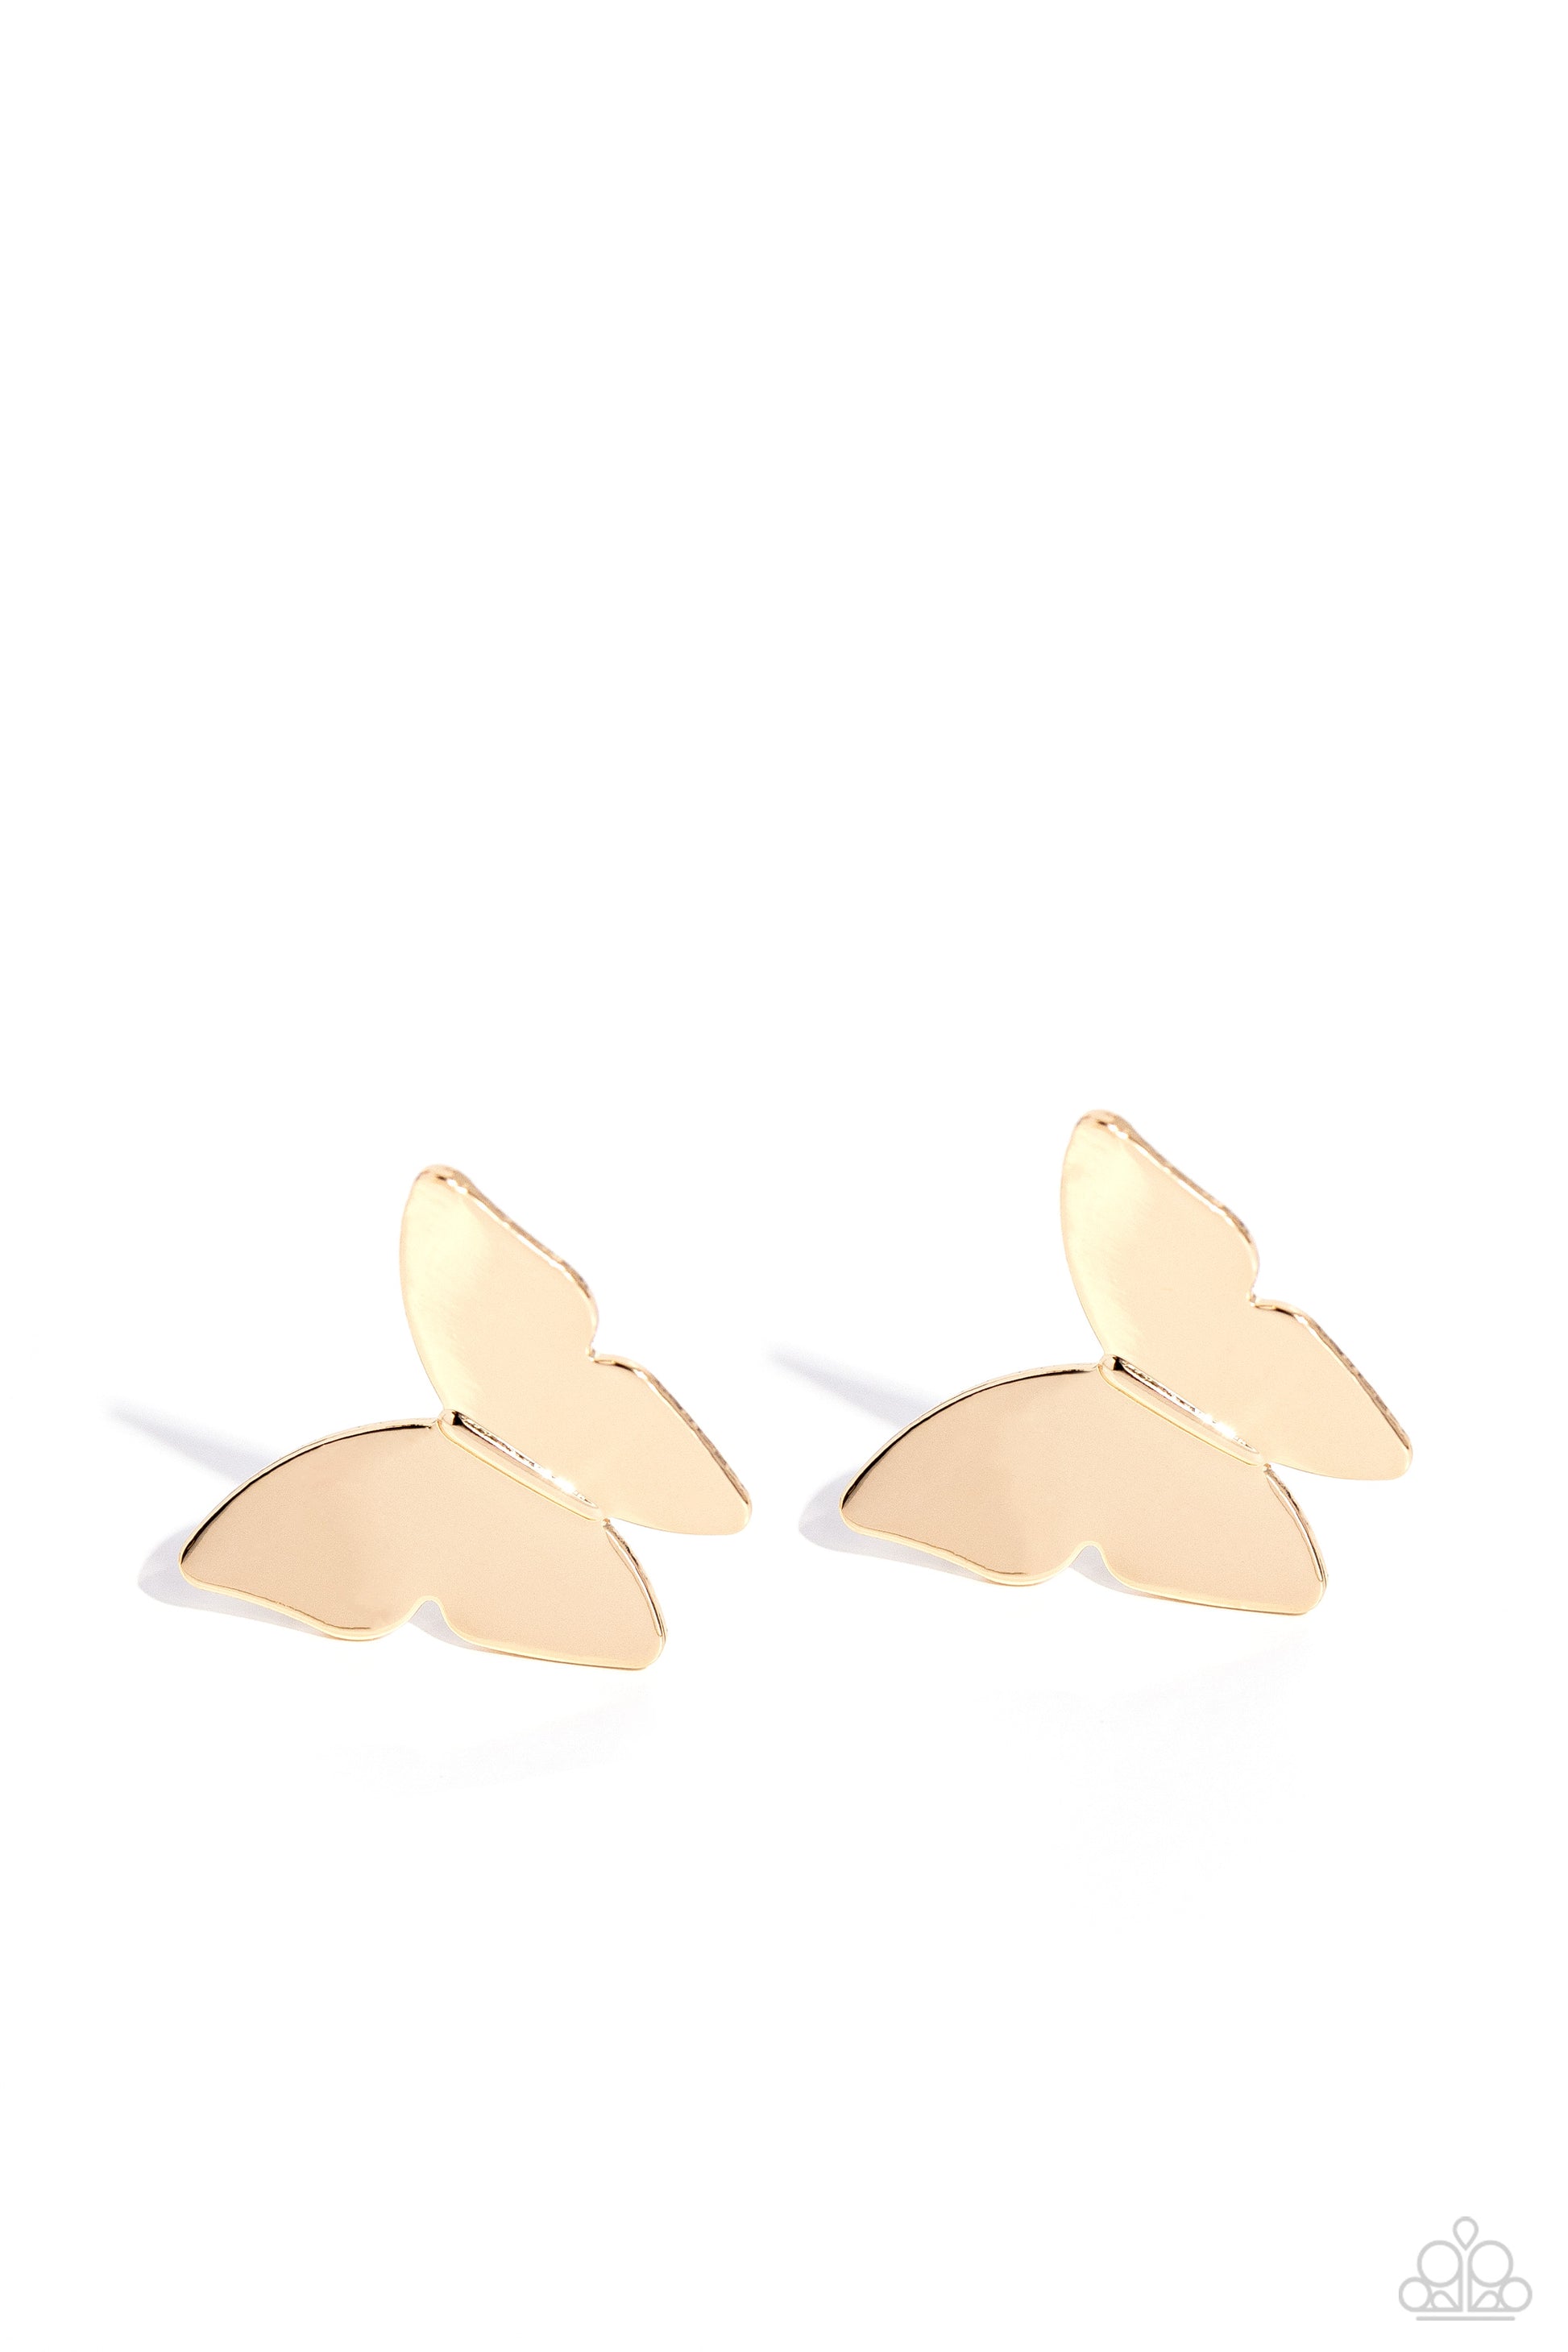 Butterfly Beholder Gold Post Earring - Paparazzi Accessories  High-sheen gold butterflies dance at the ear, creating a whimsical centerpiece. Earring attaches to a standard post fitting.  Sold as one pair of post earrings.  Sku:  P5PO-GDXX-254XX